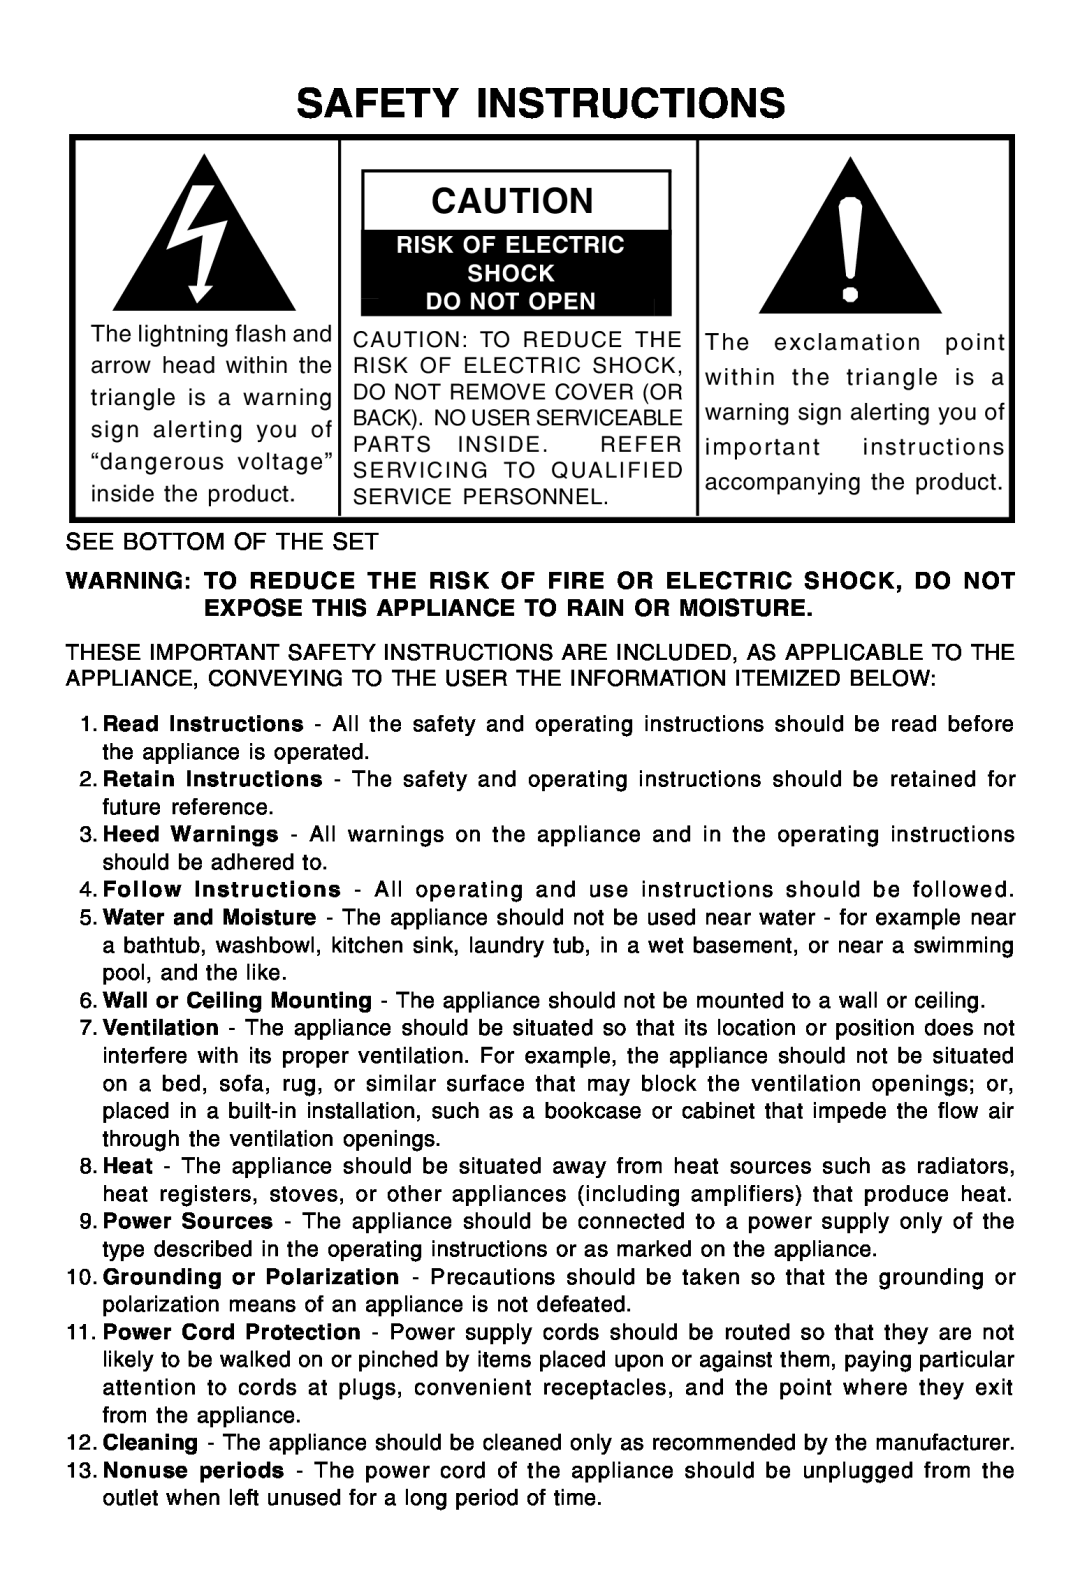 Lenoxx Electronics CDR-190 operating instructions Safety Instructions, Risk Of Electric Shock Do Not Open 